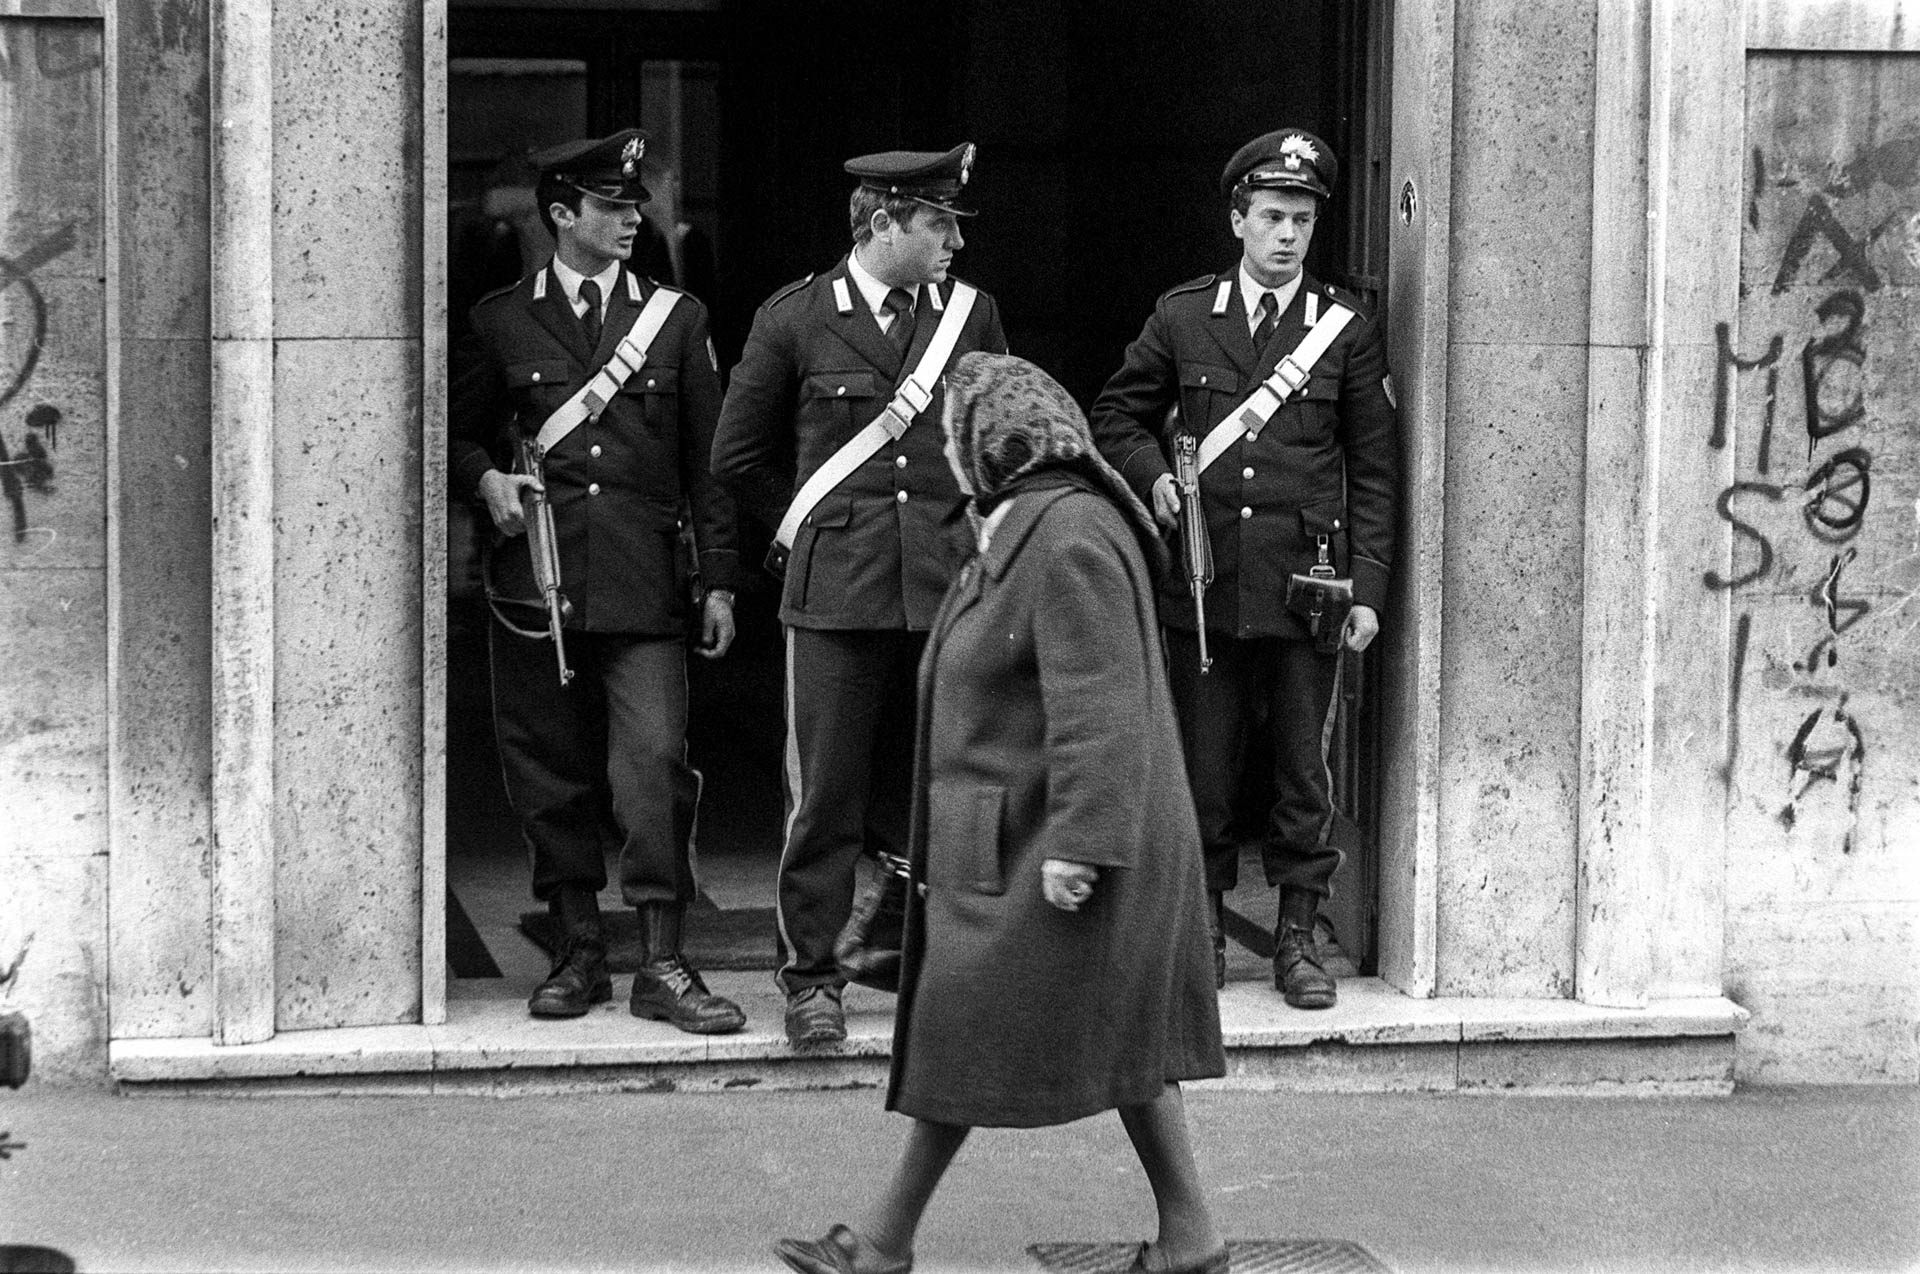  Rome, Italy - 10 May 1978 The reaction of the people after the discovery of Aldo Moro's corpse.&nbsp;    